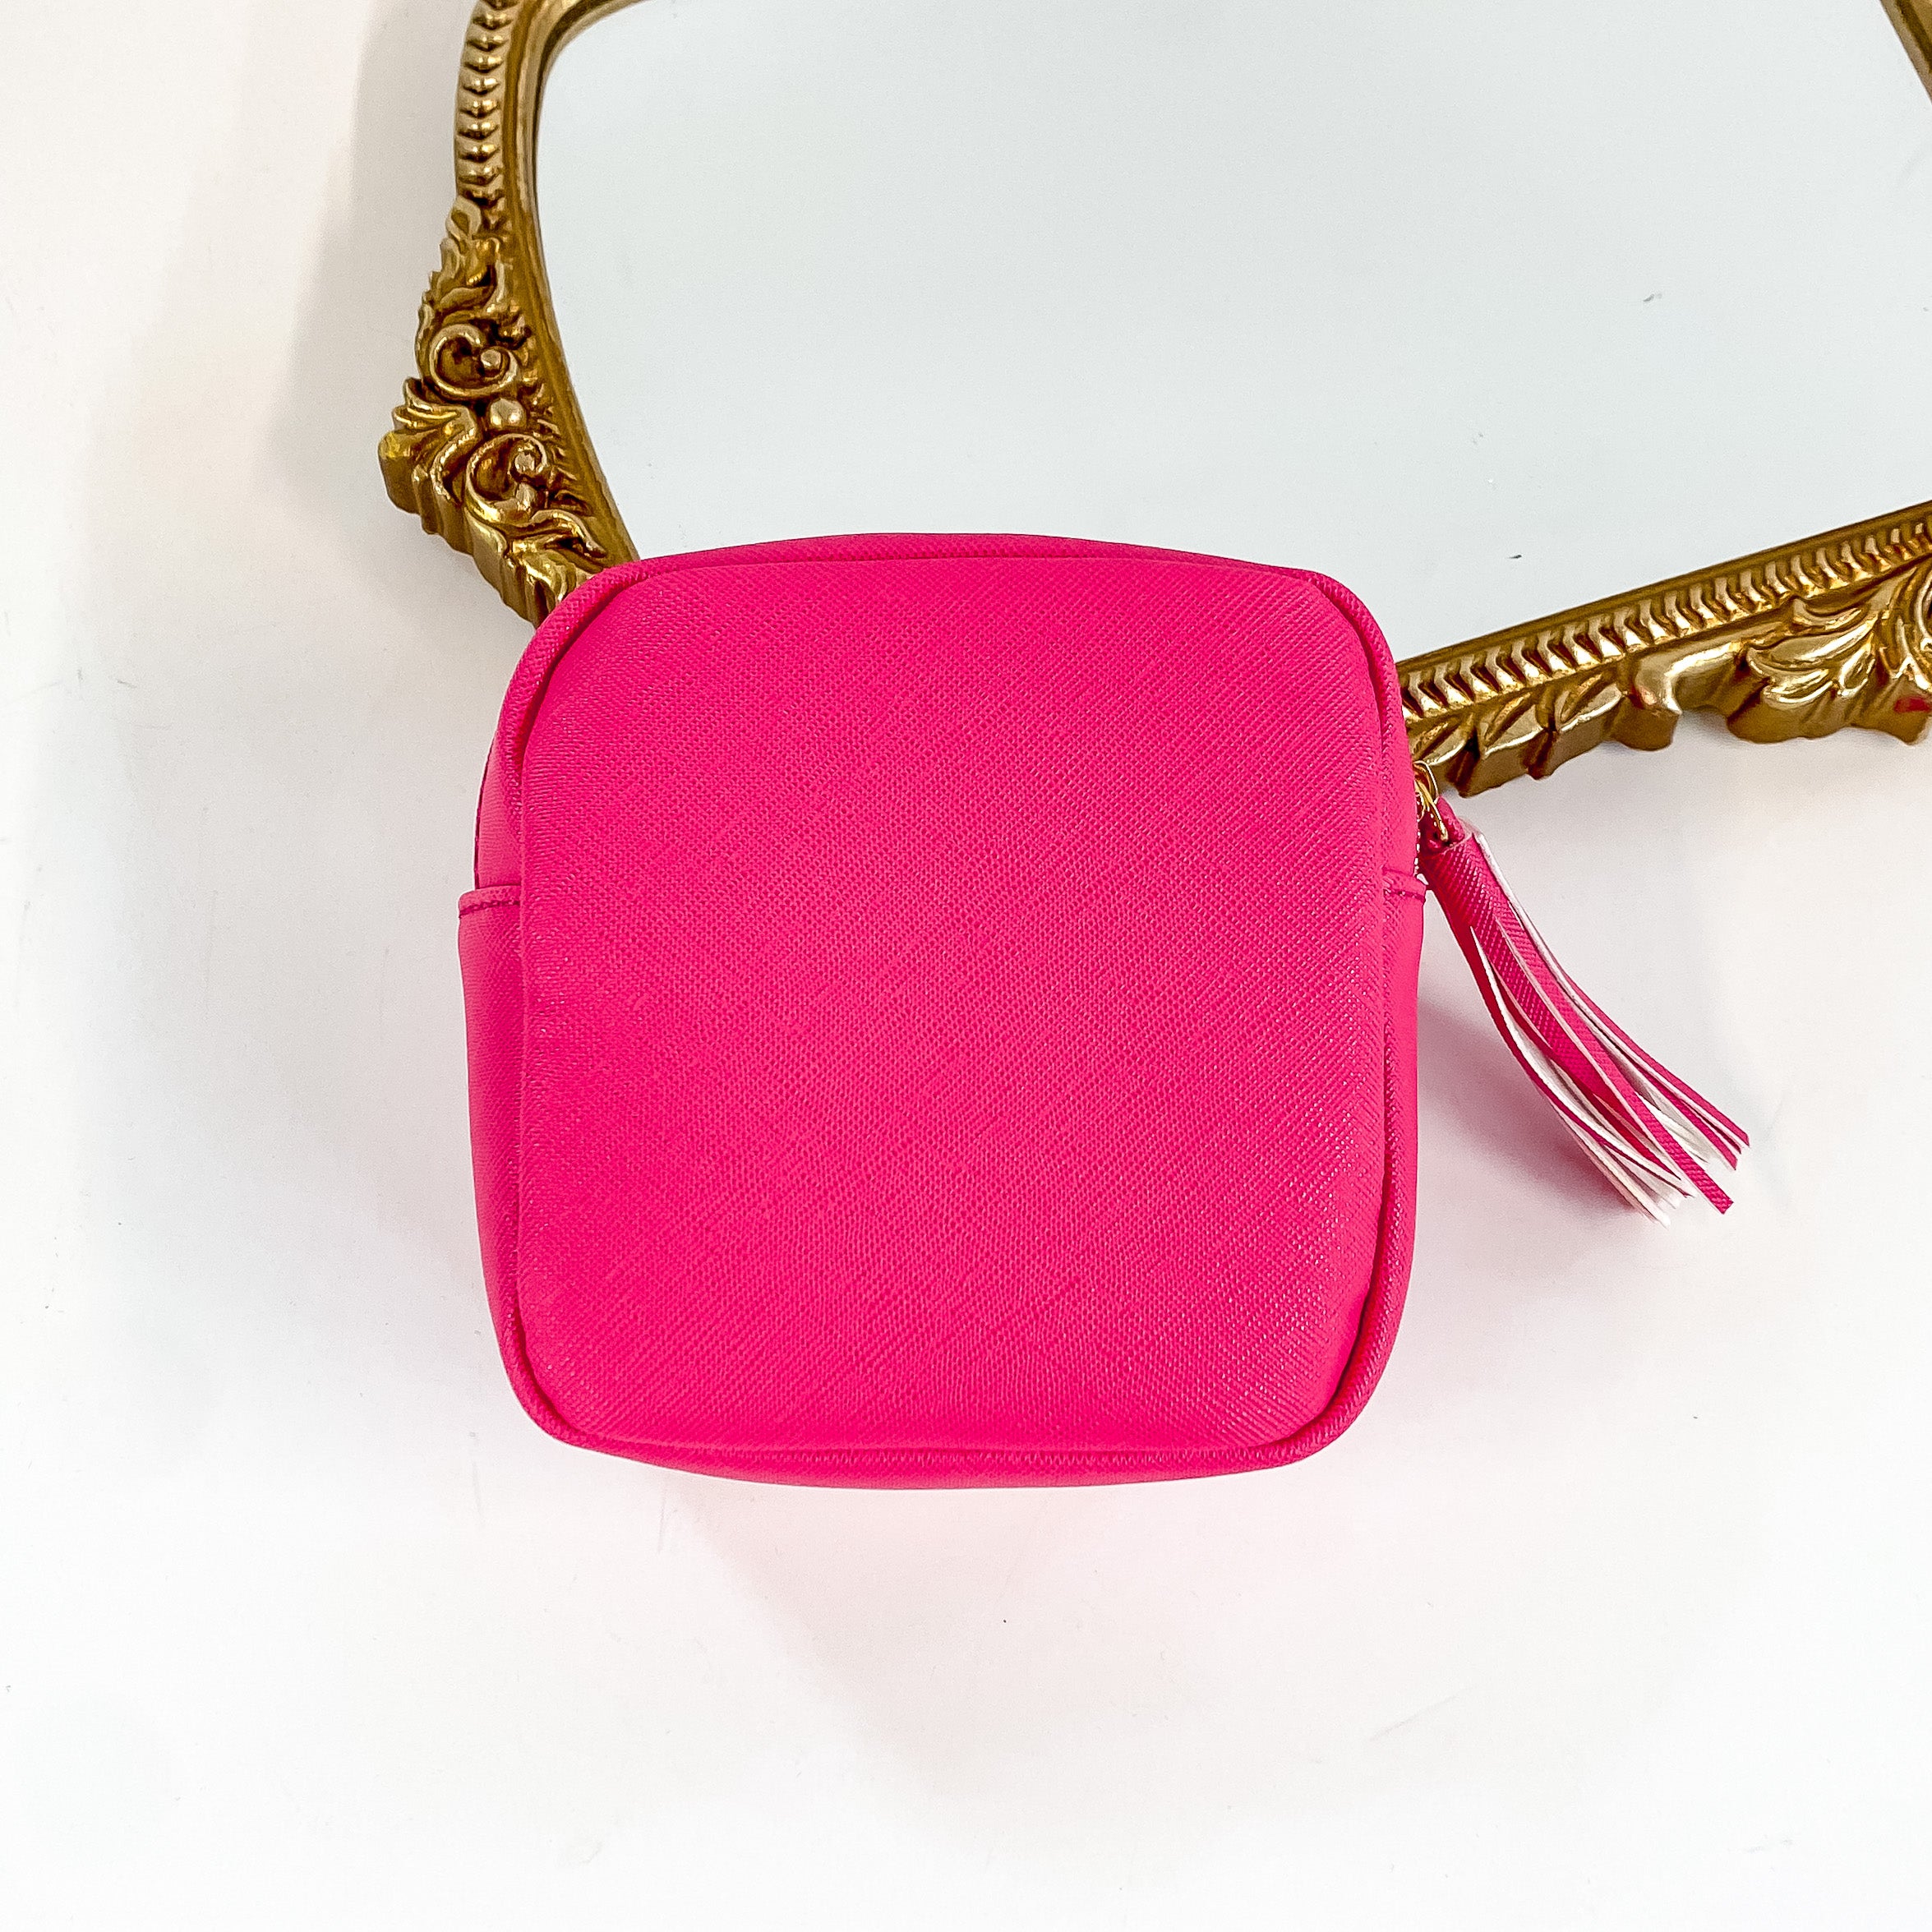 Hollis | Tech Organizer in Hot Pink - Giddy Up Glamour Boutique